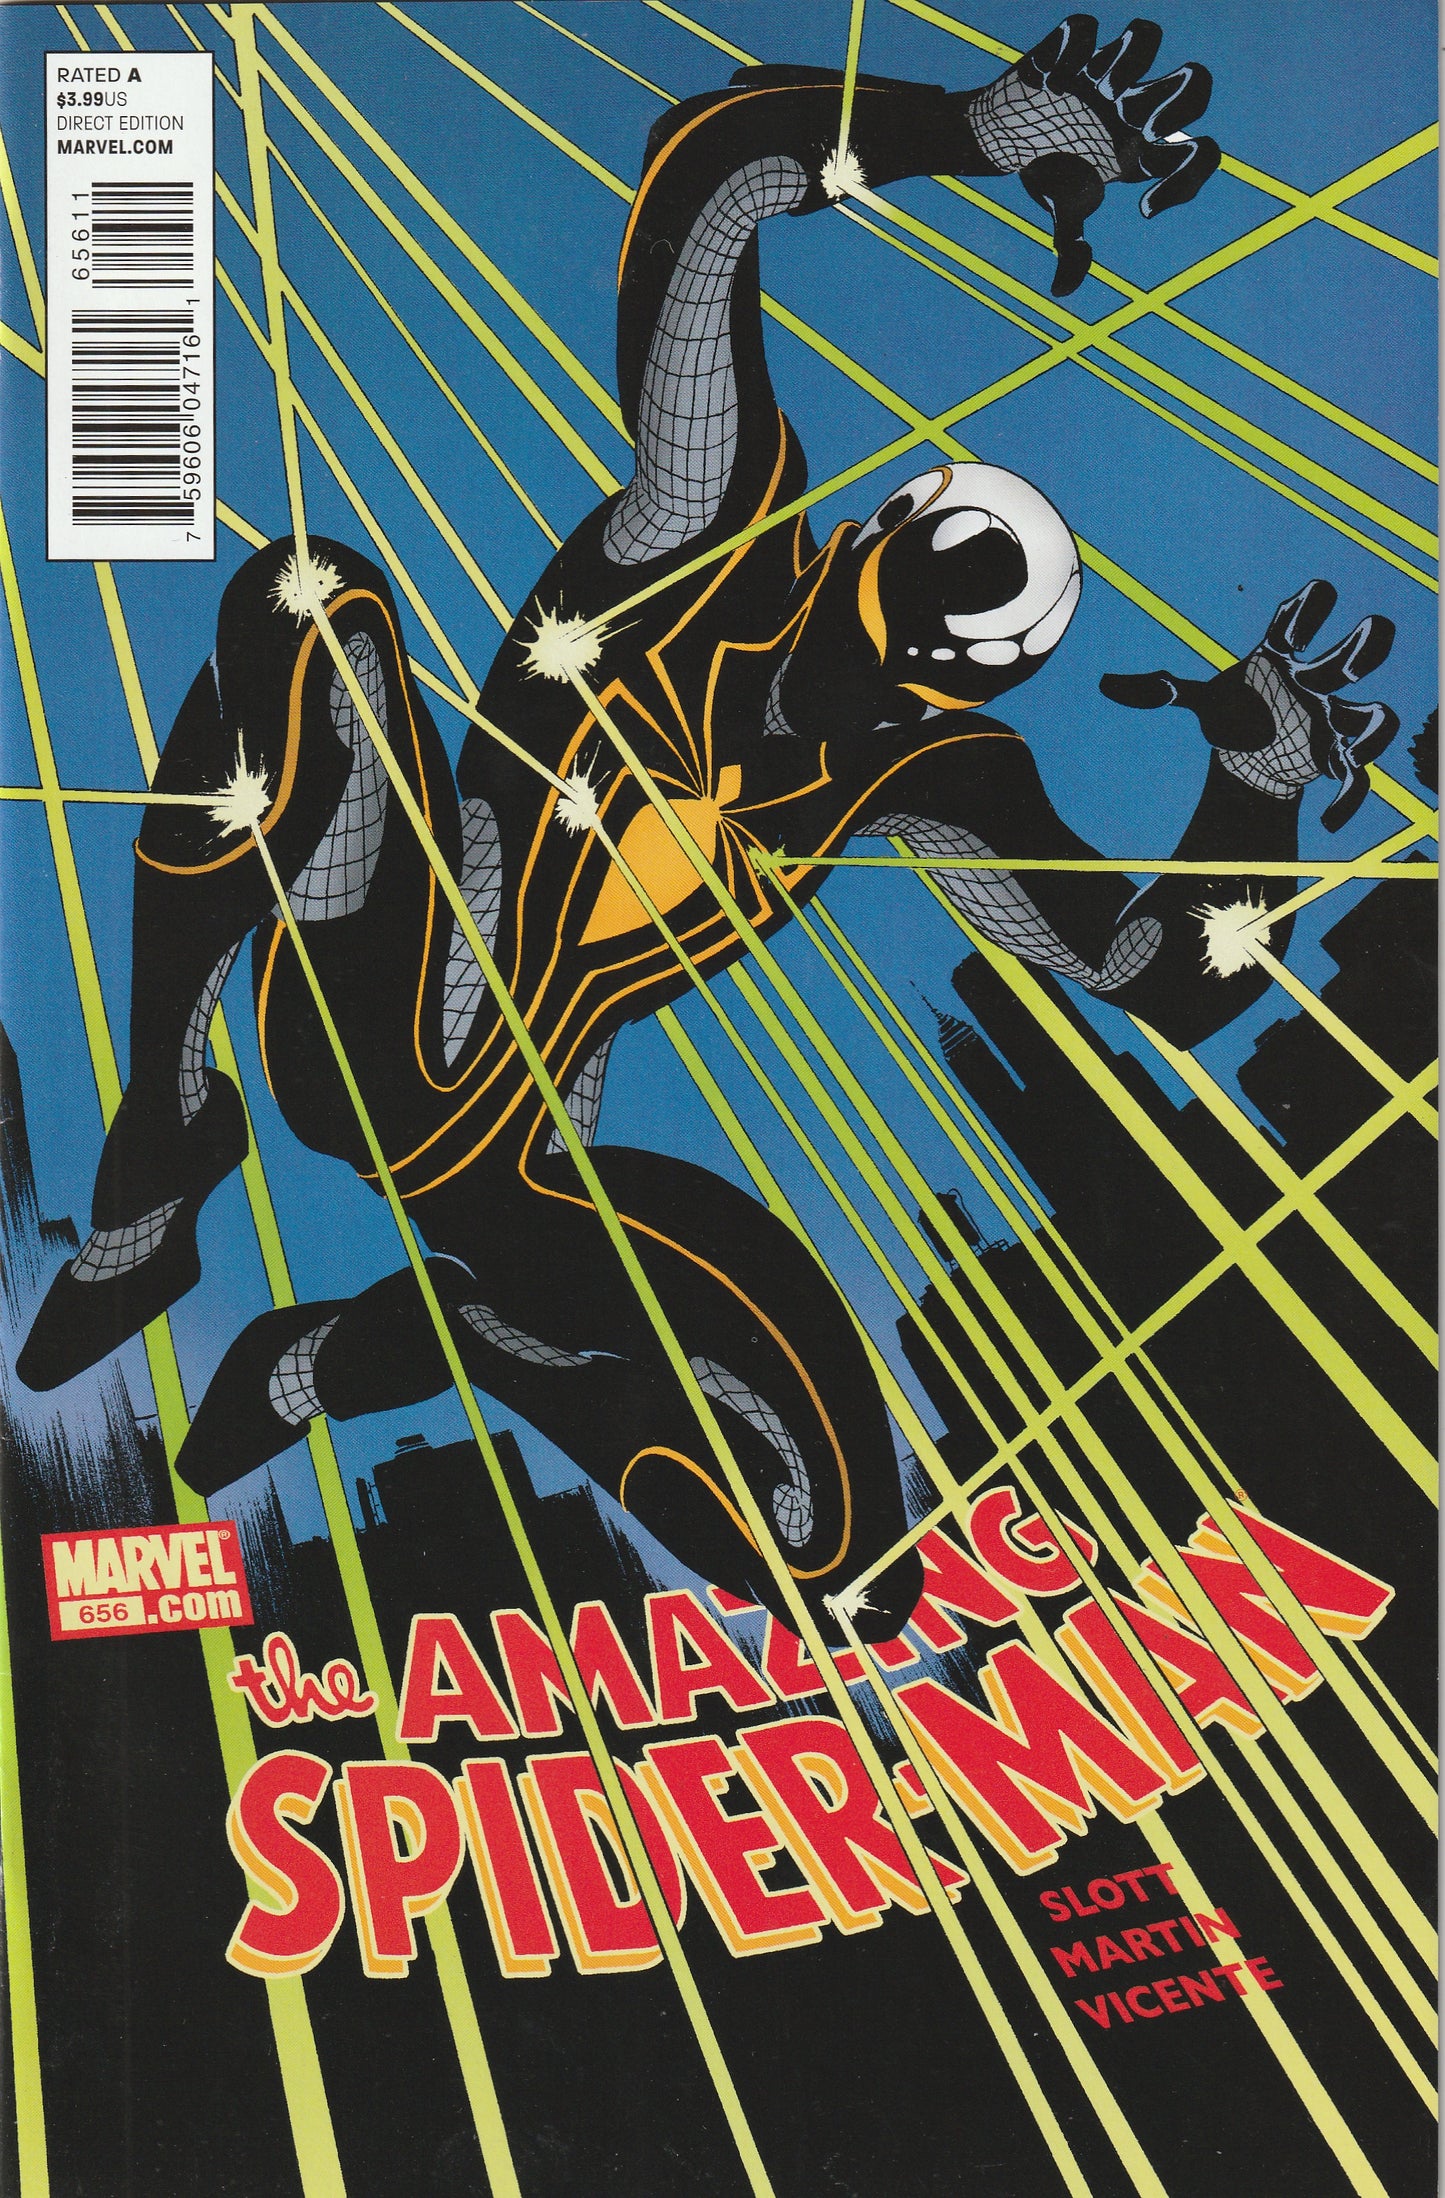 Amazing Spider-Man #656 (2011) - 1st appearance of Spider-Man's New Spider-Armor Suit